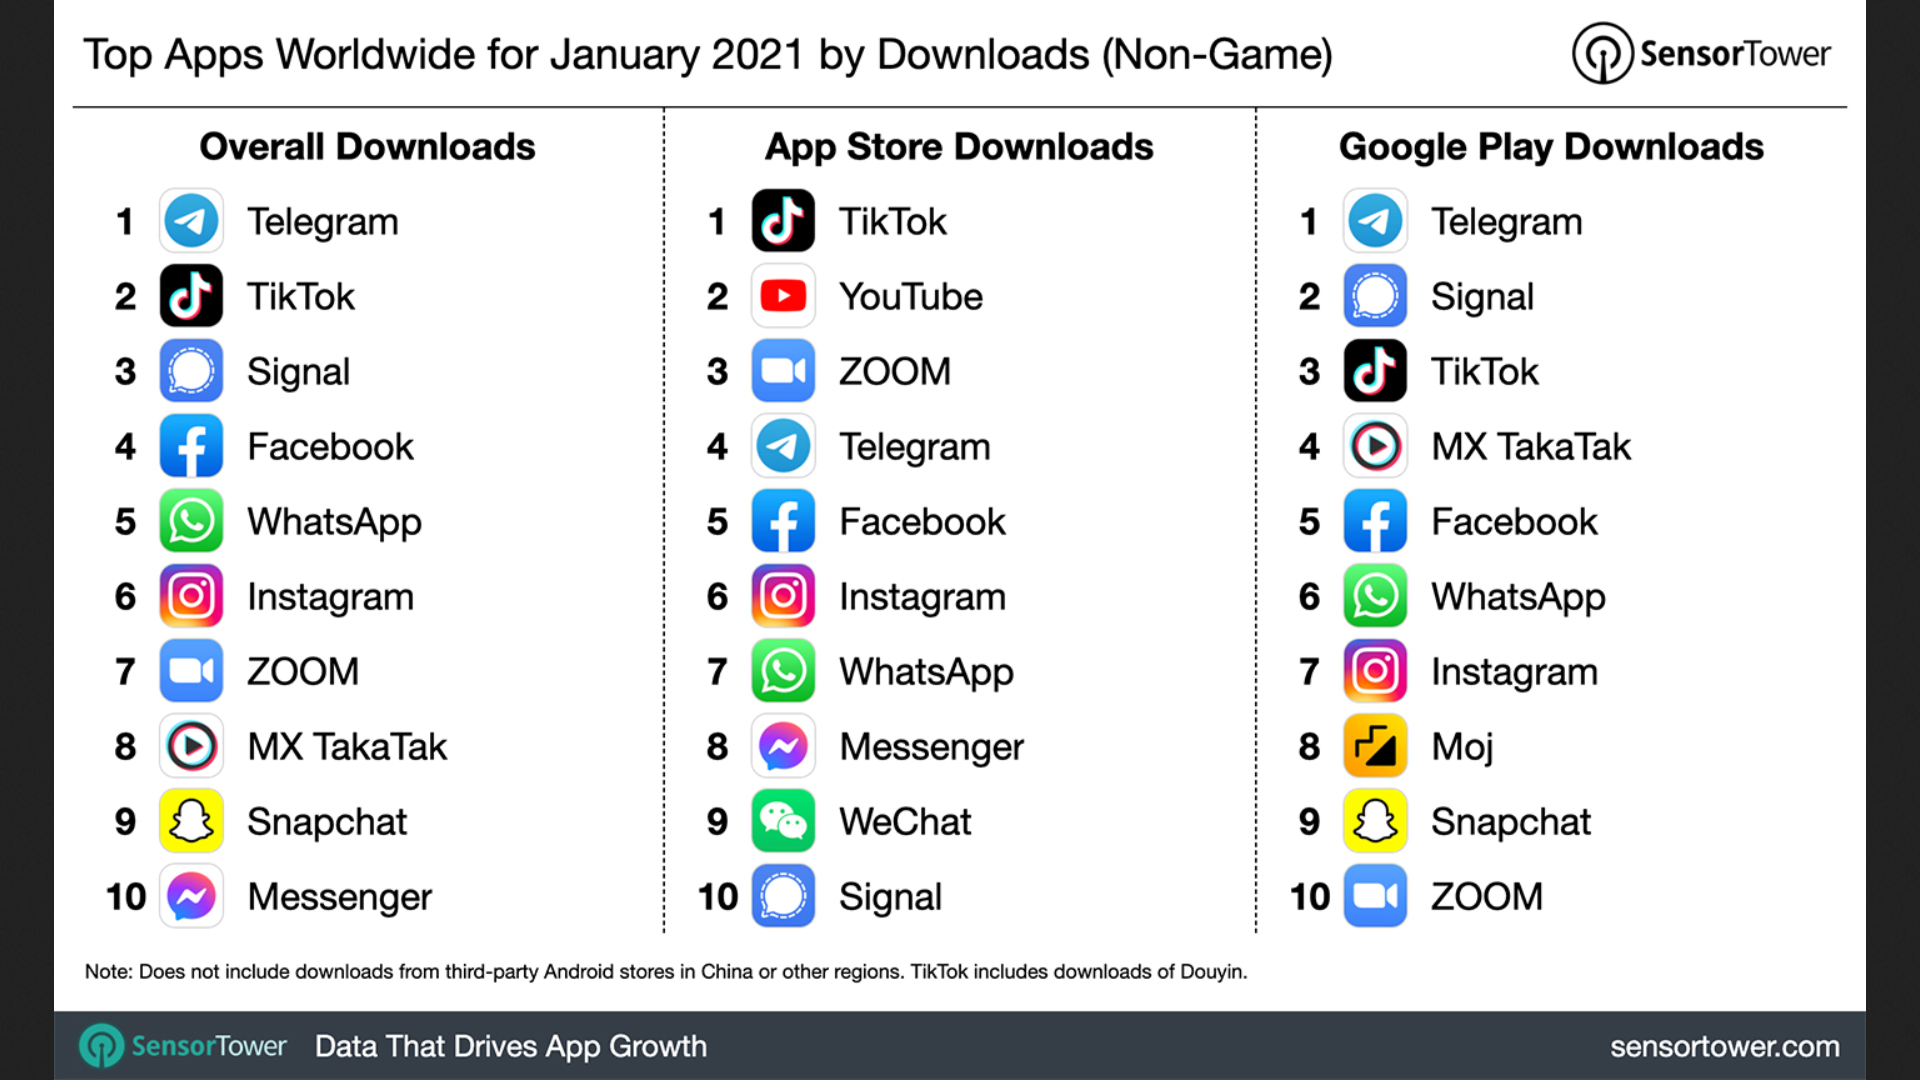 Telegram is the most downloaded mobile app for January 2021 as to - NotebookCheck.net News